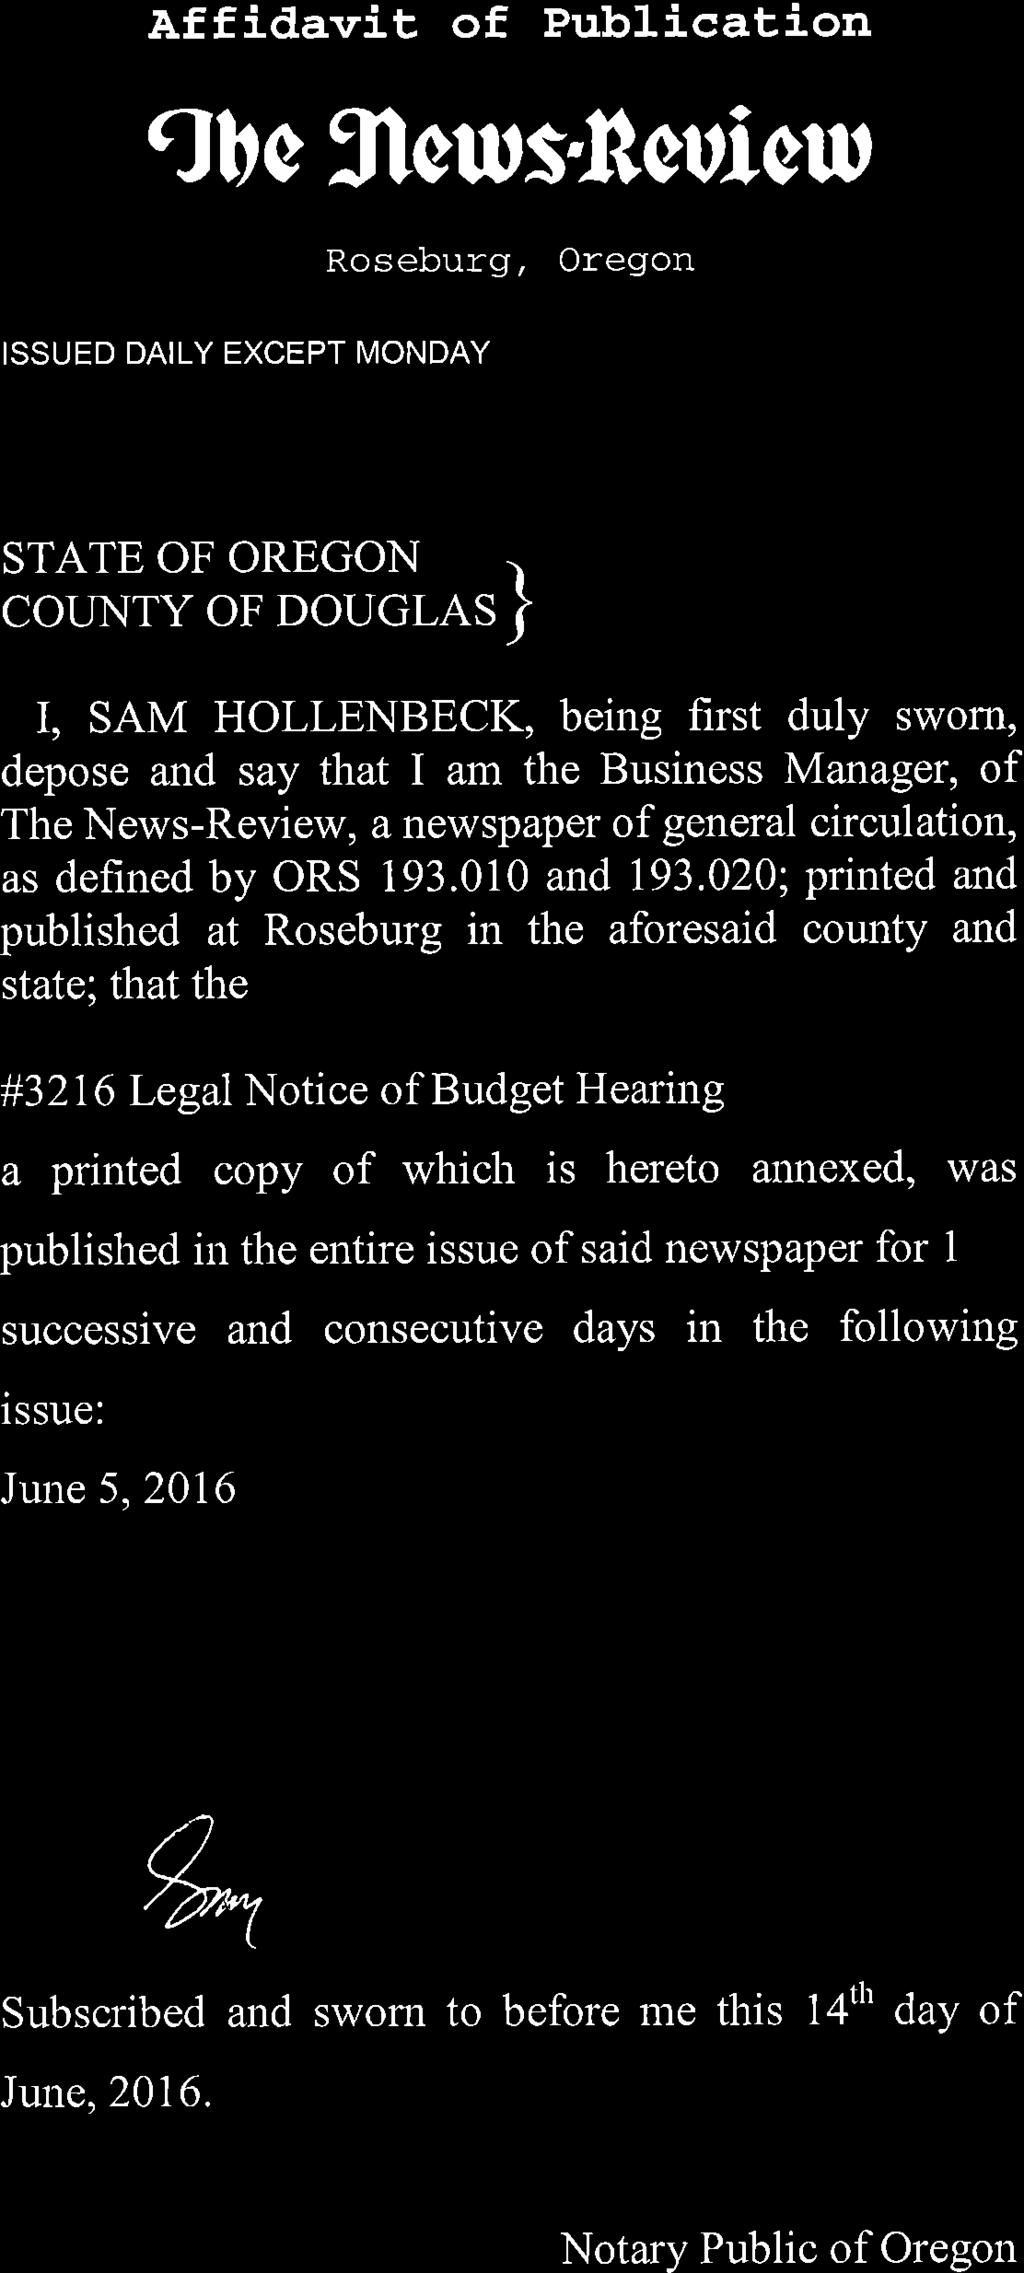 020; printed and published at Roseburg in the aforesaid county and state; that the KAREN DANIELS Yêer olher than Læl Tåxes Yeår LMI #3216 Legal Notice of Budget Hearing -o 107,573 aa7 915 2.